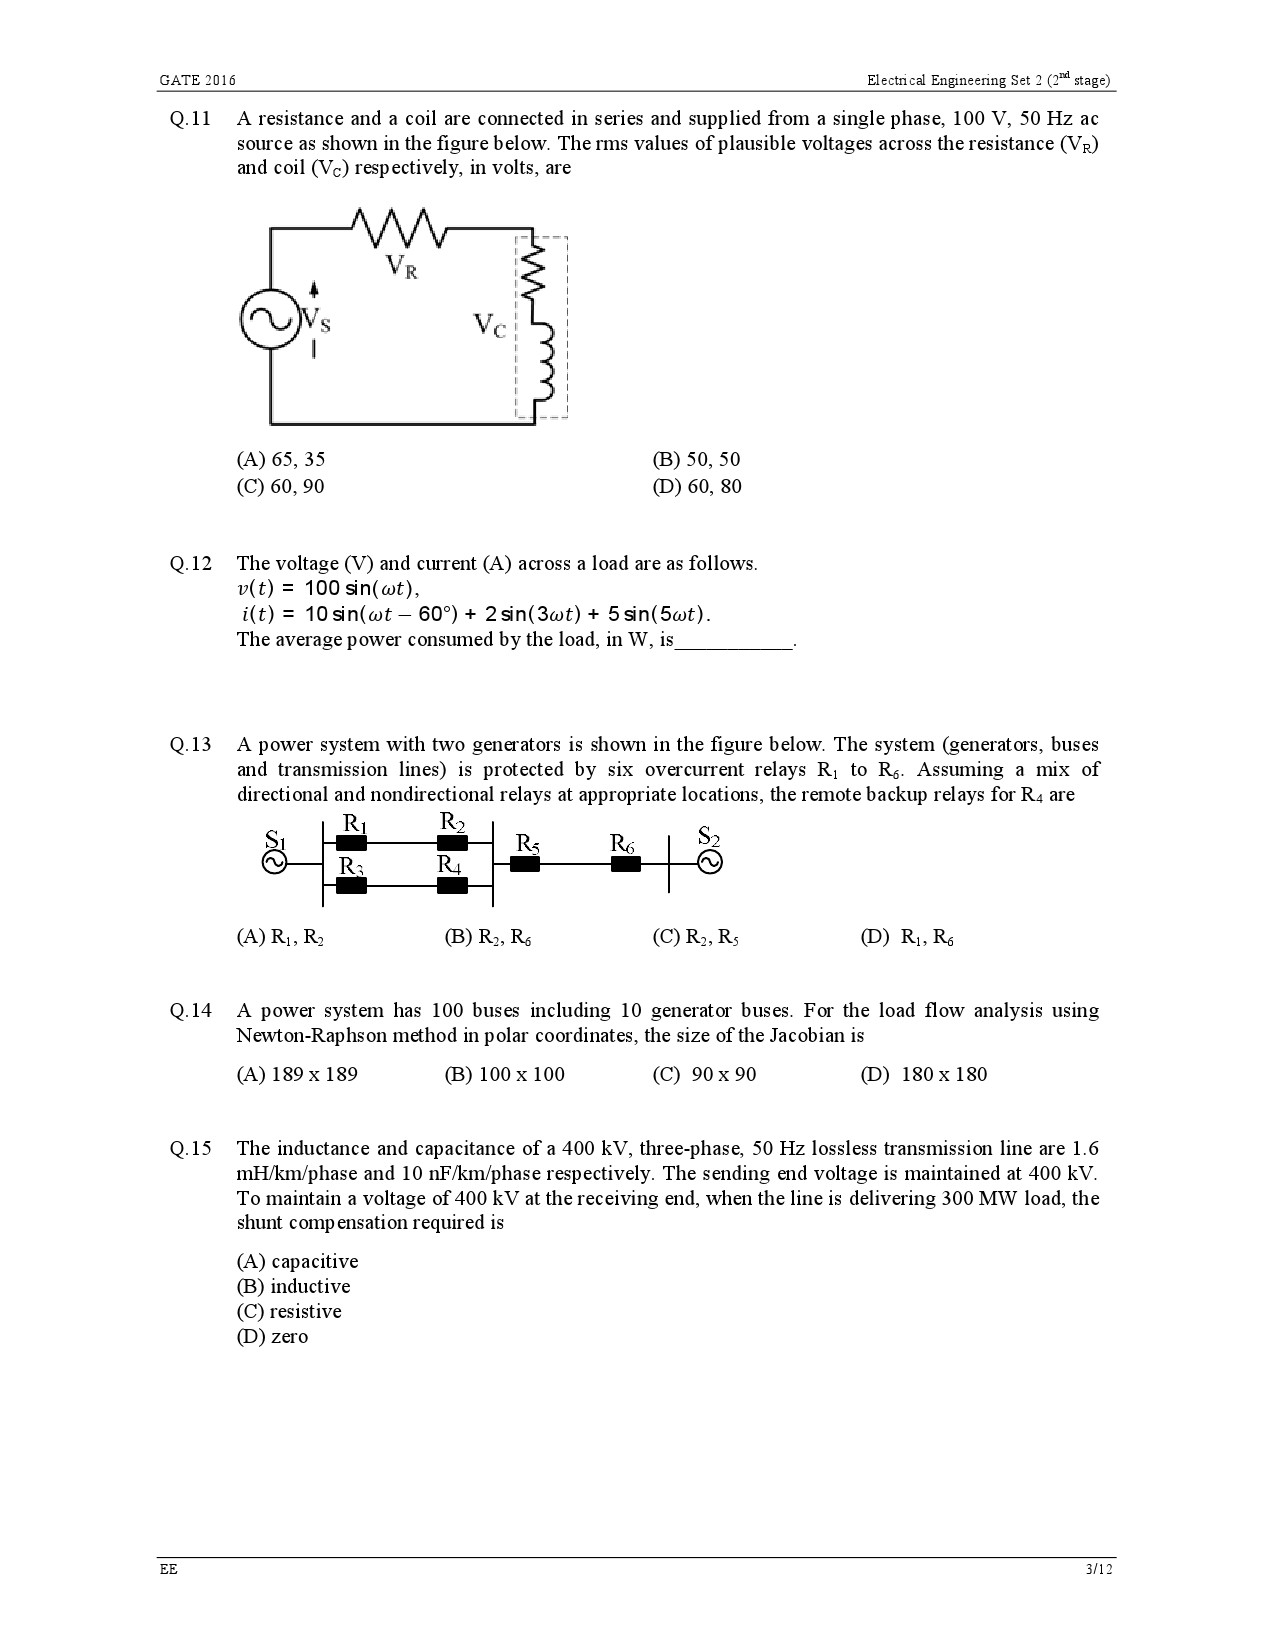 GATE Exam Question Paper 2016 Electrical Engineering Set 2 6